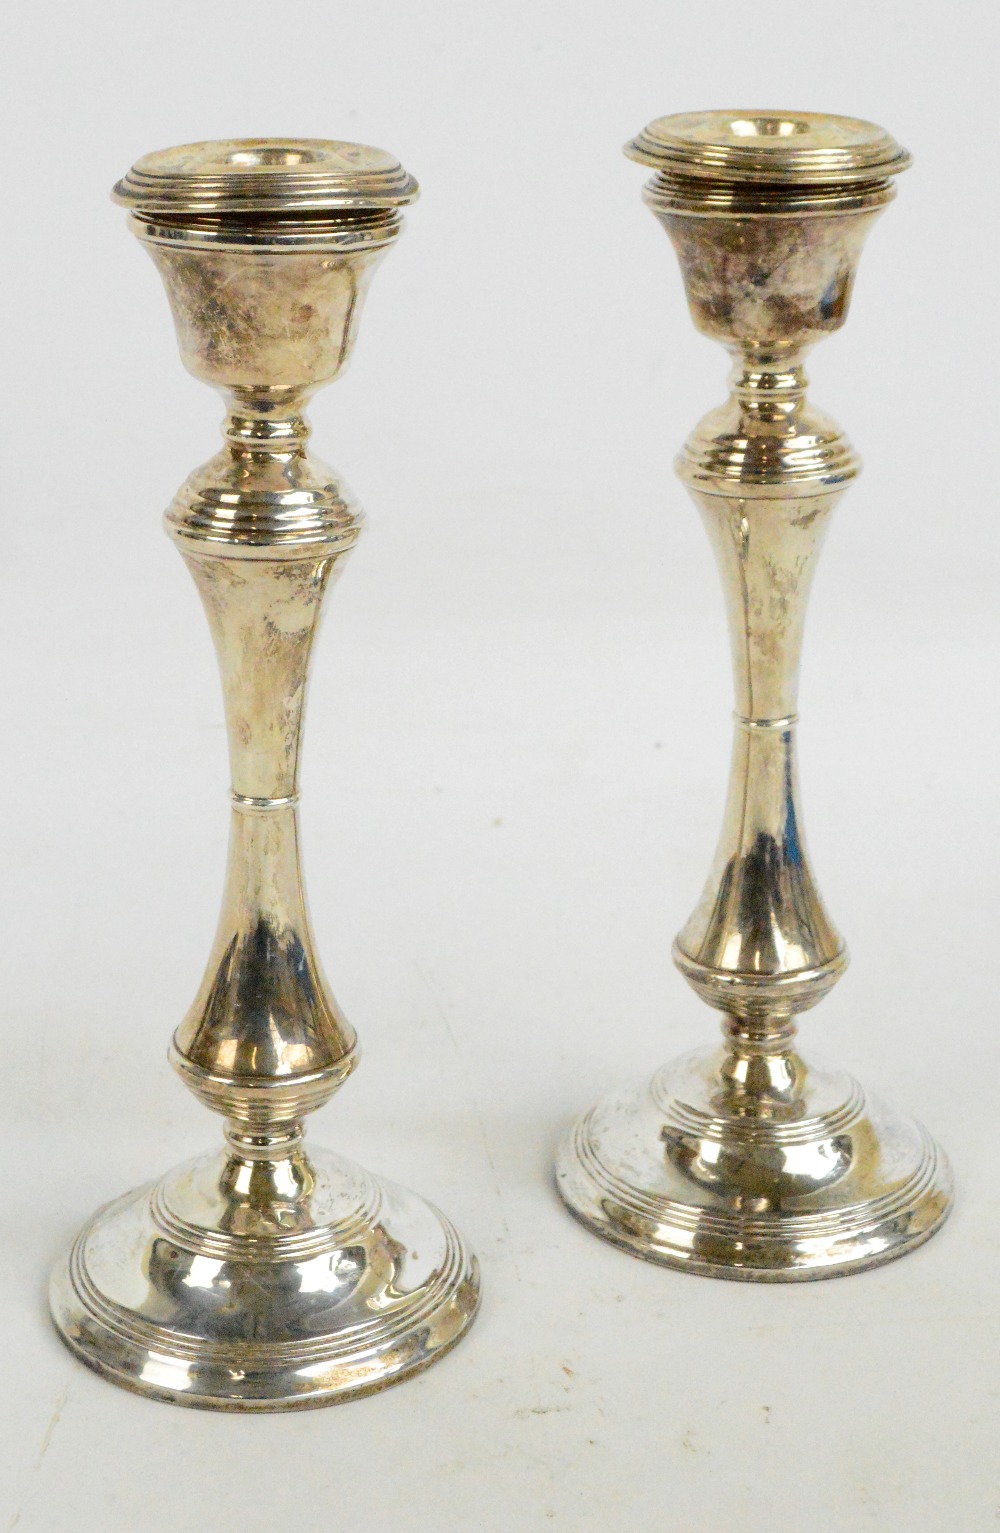 A pair of Elizabeth II hallmarked silver candlesticks with bell shaped sconces and detachable